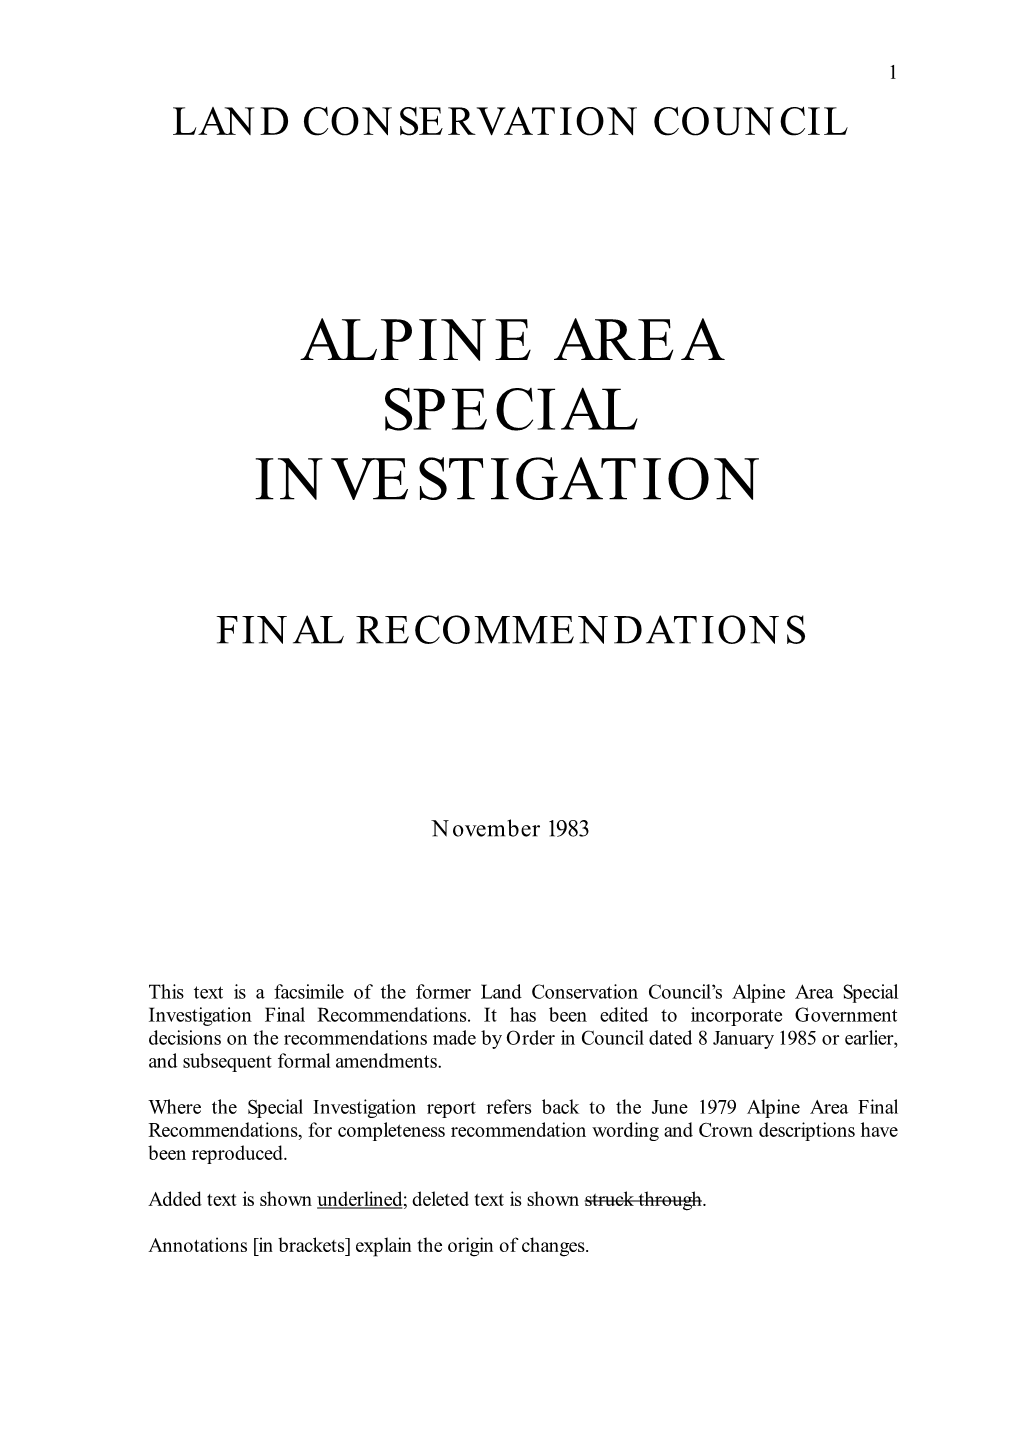 Alpine Area Special Investigation Final Recommendations